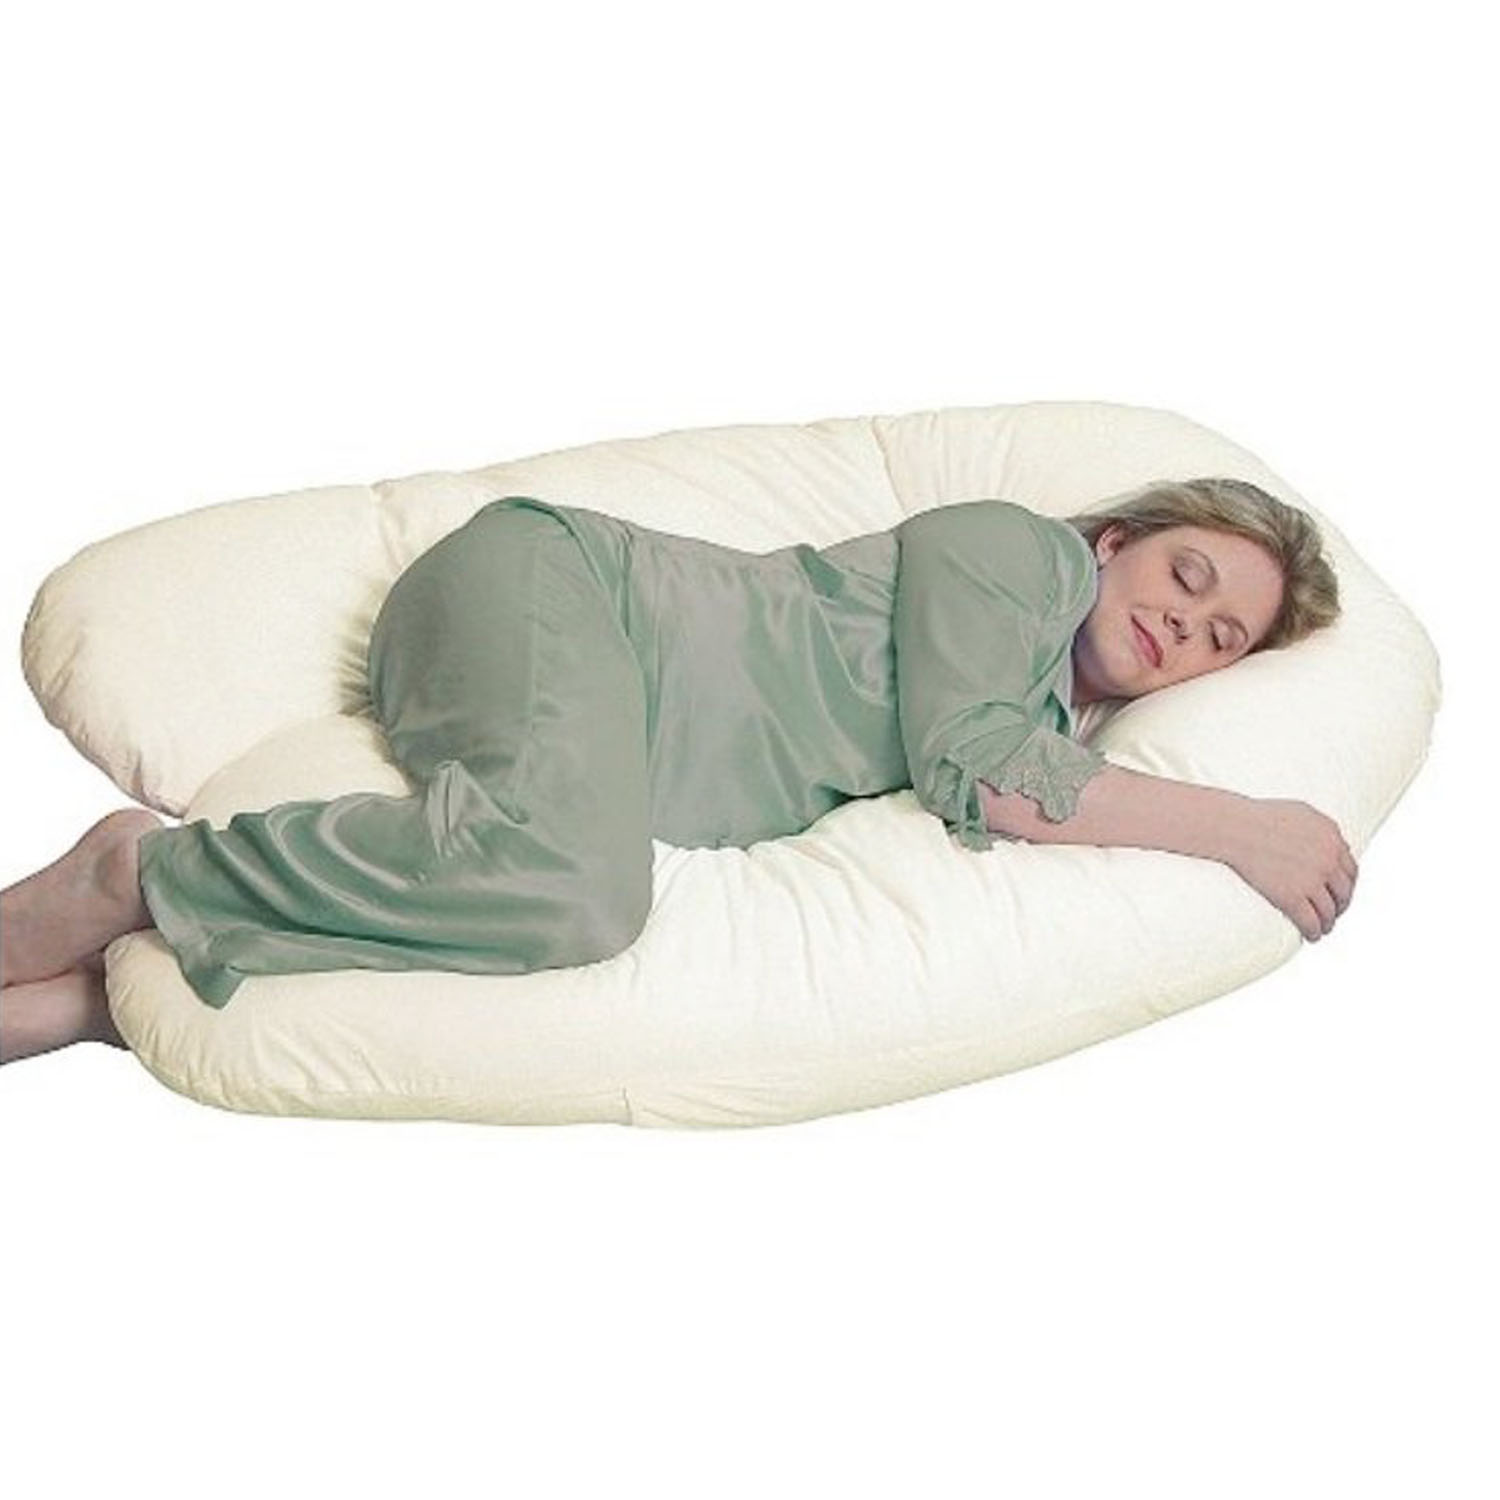 https://www.mamanatural.com/wp-content/uploads/Complete-body-size-Why-You-Need-a-Pregnancy-Pillow-and-How-to-Find-the-Perfect-One-post-by-Mama-Natural.jpg